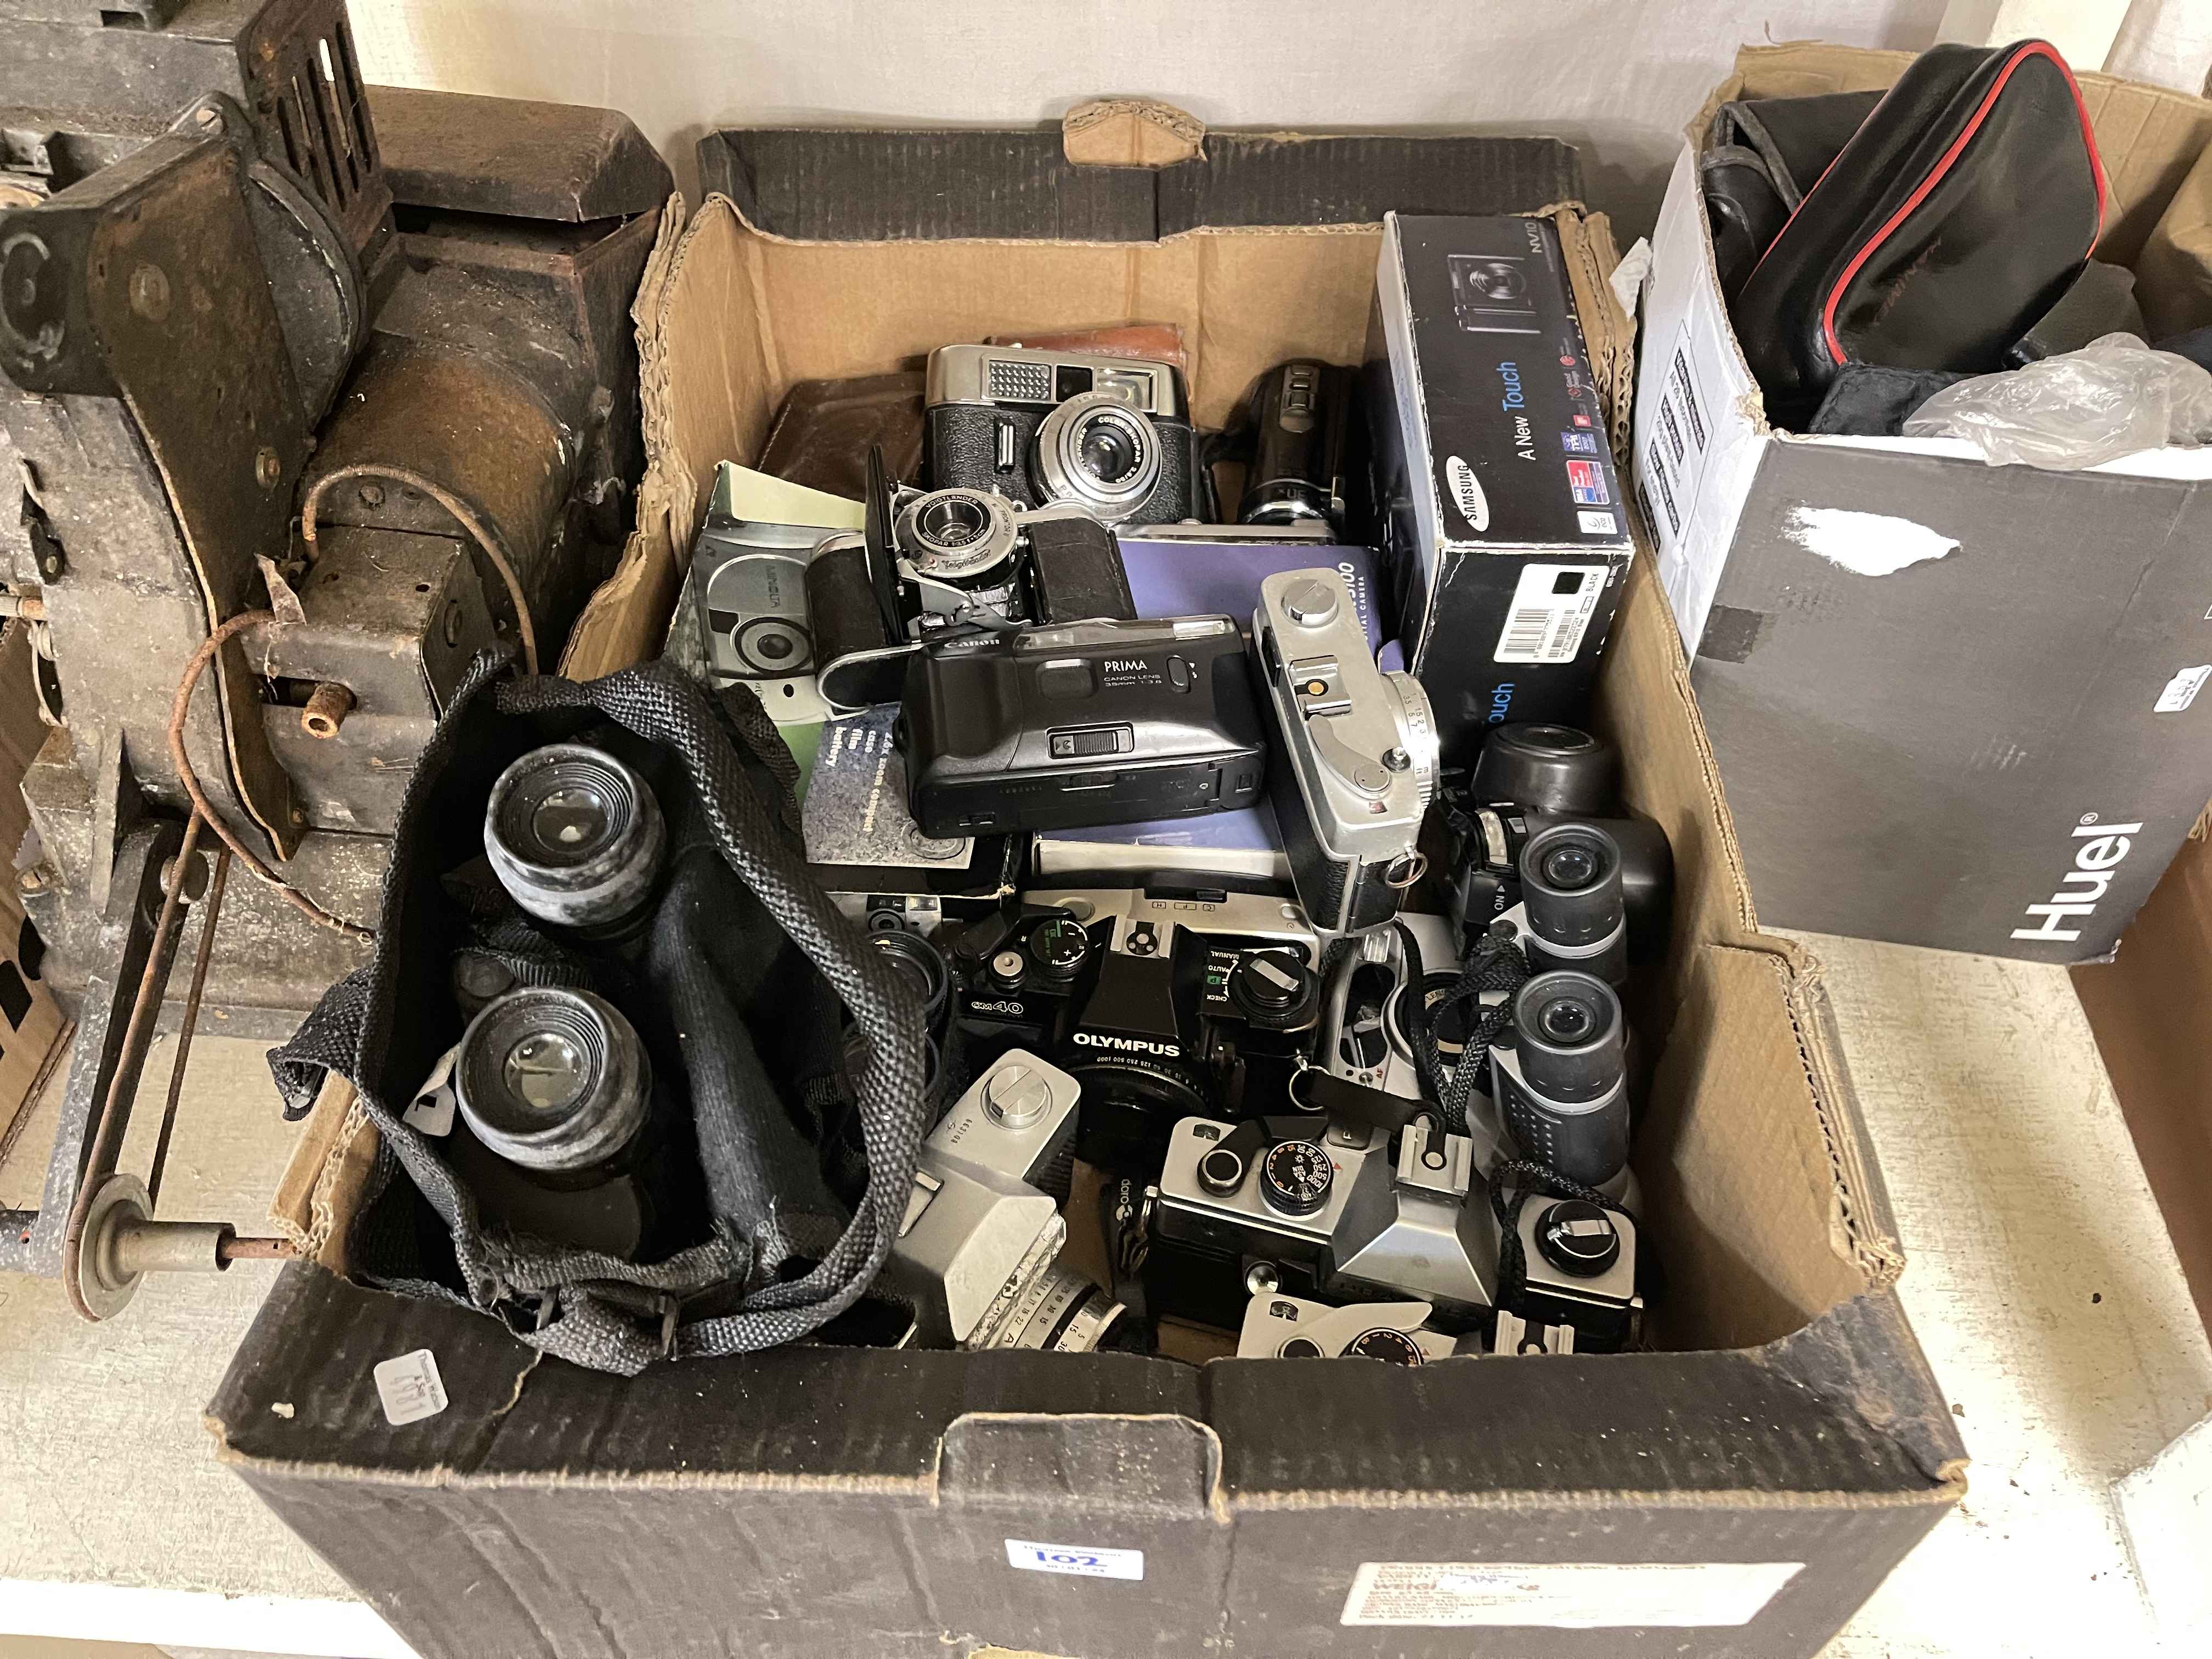 Large collection of cameras and photographic equipment, etc. - Image 2 of 4